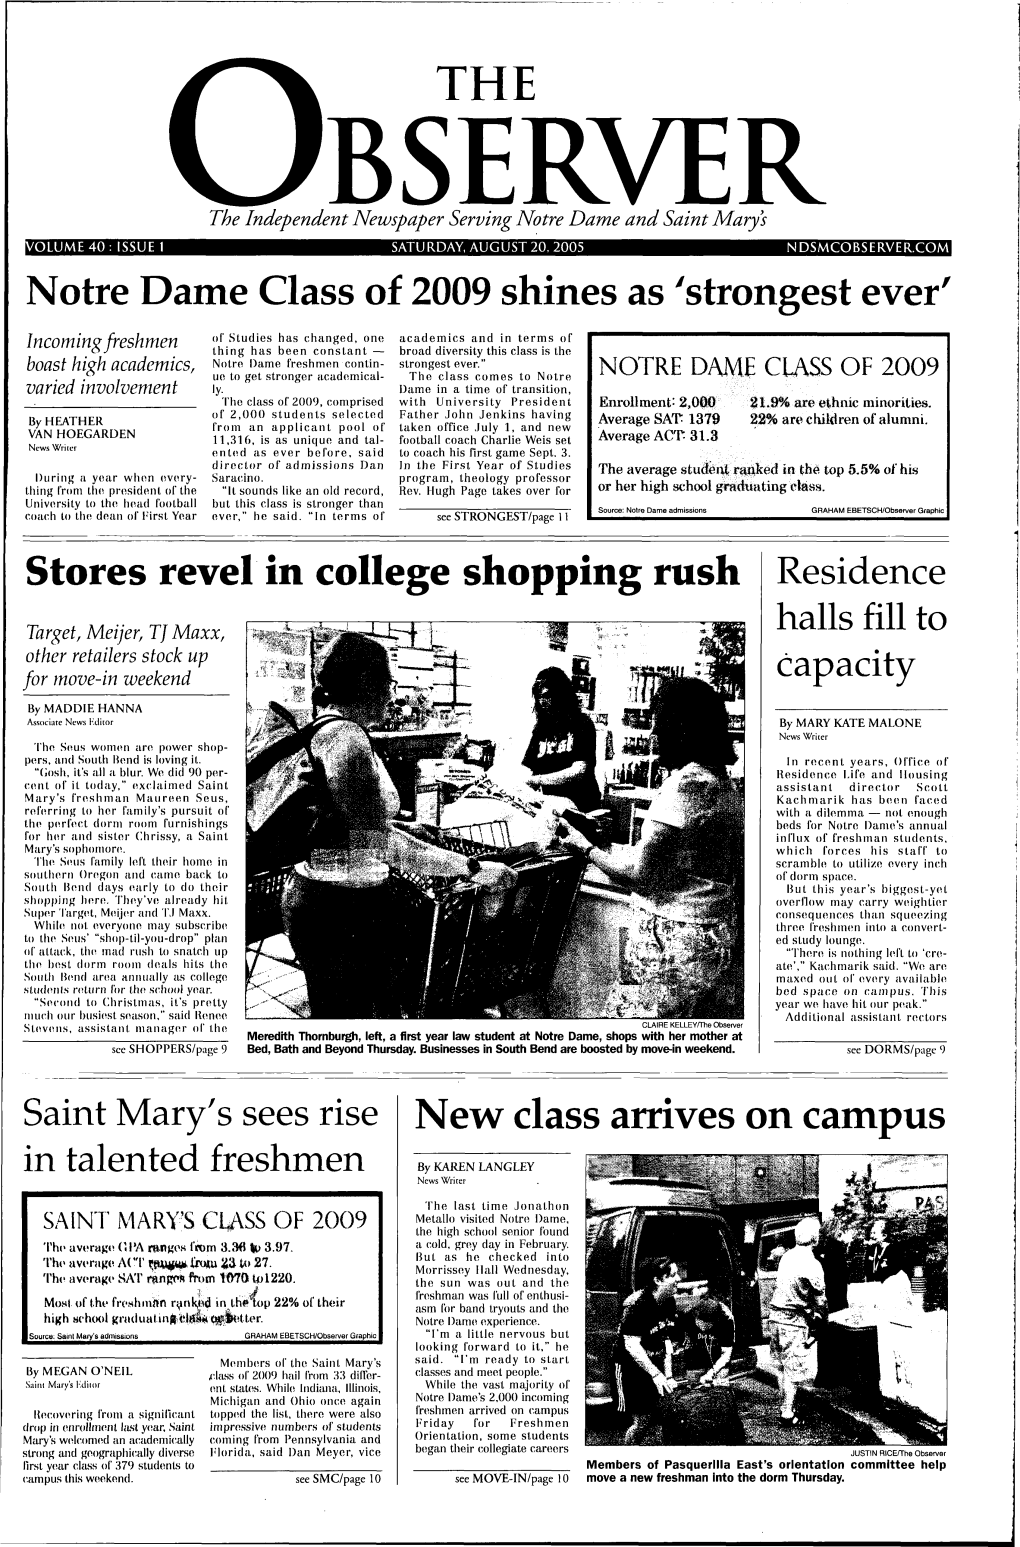 Notre Dame Class of 2009 Shines As 'Strongest Ever'